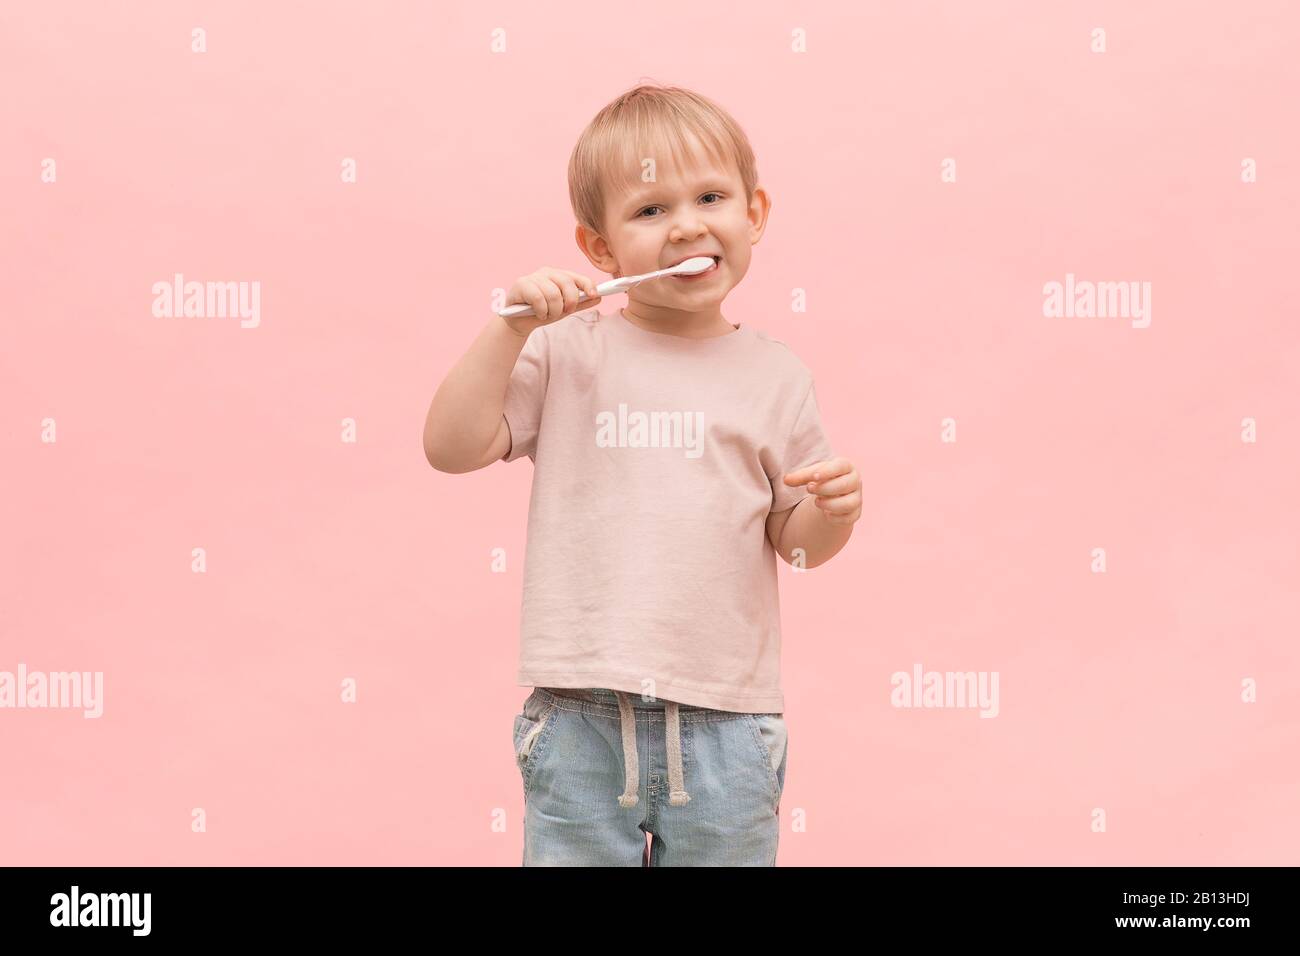 Child boy blond brushes his teeth with a toothbrush on a pink background. Concept for articles on healthy gums, oral hygiene and treatment in dentistr Stock Photo